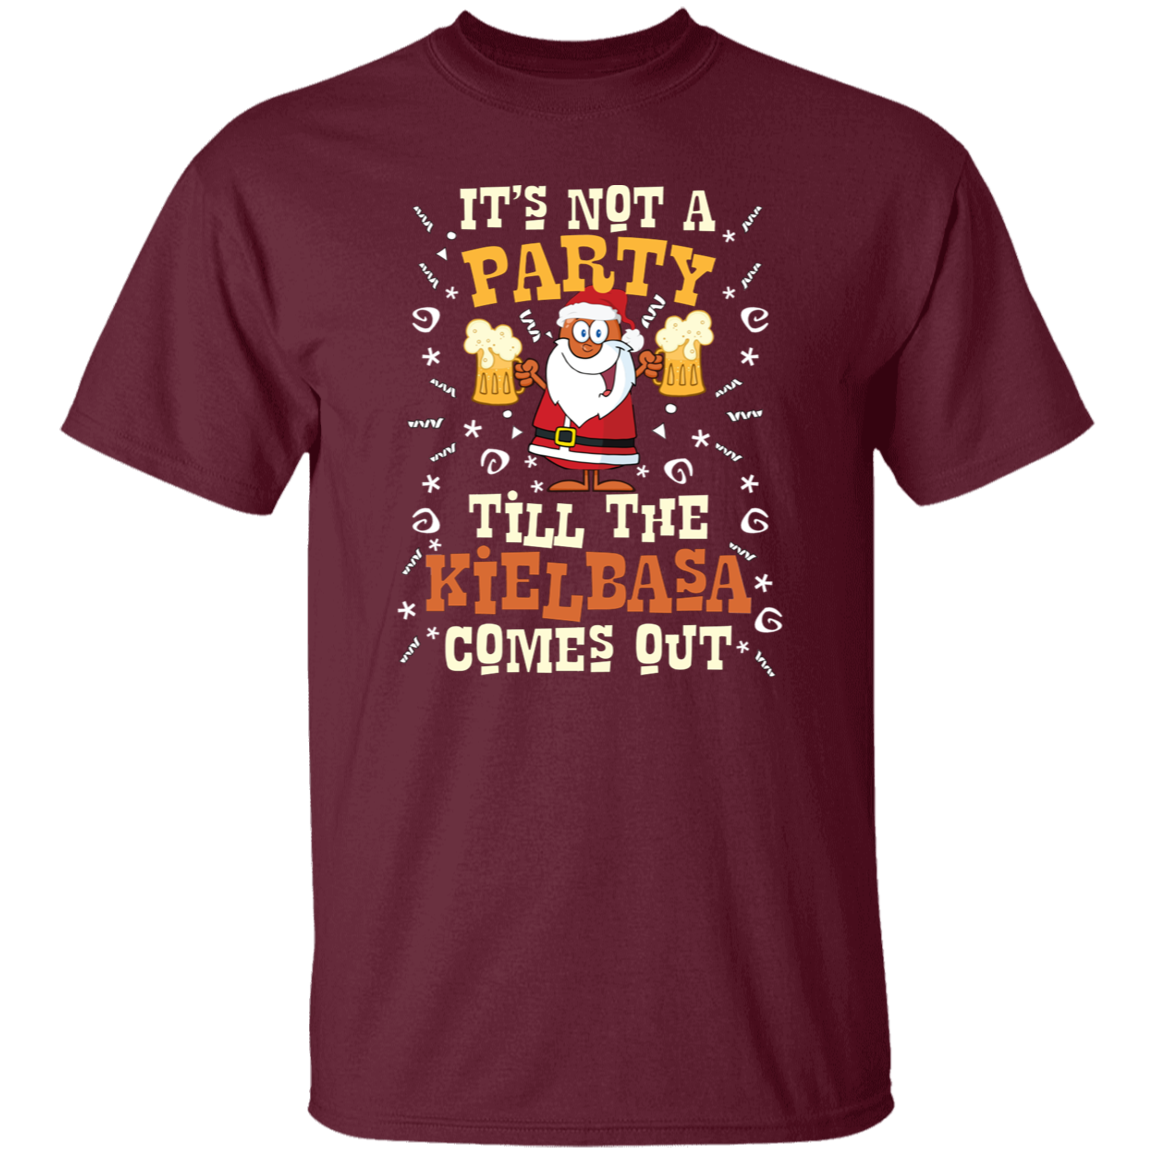 Its Not A Party Till The Kielbasa Comes Out - Christmas Version Apparel CustomCat G500 5.3 oz. T-Shirt Maroon S